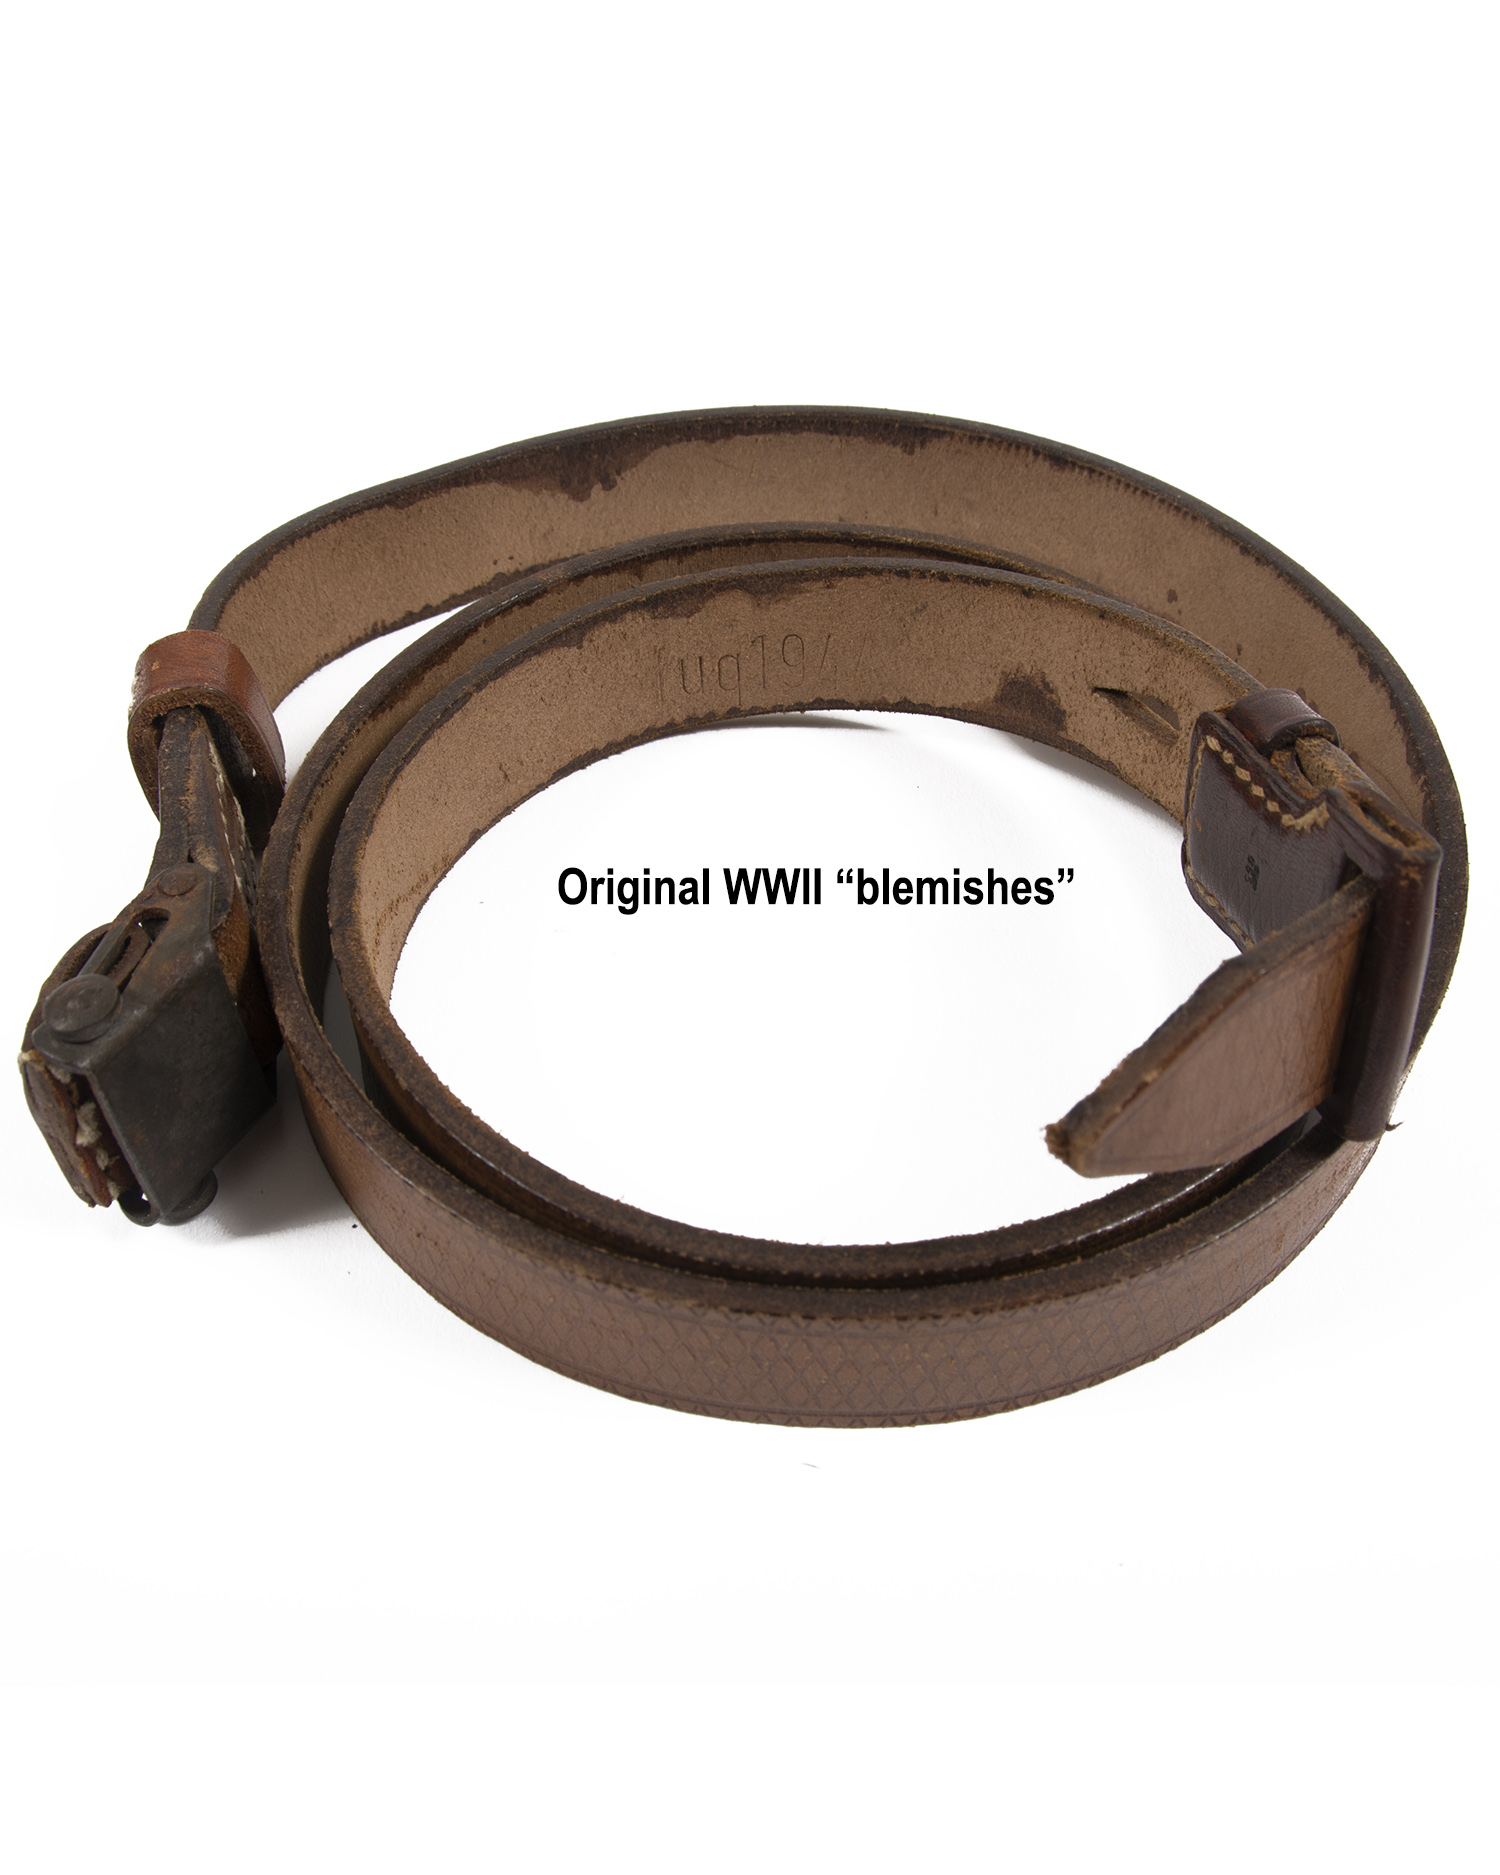 Original Wwii German K98 G43 33 40 Mauser Leather Sling With Markings Original Period Items Germany